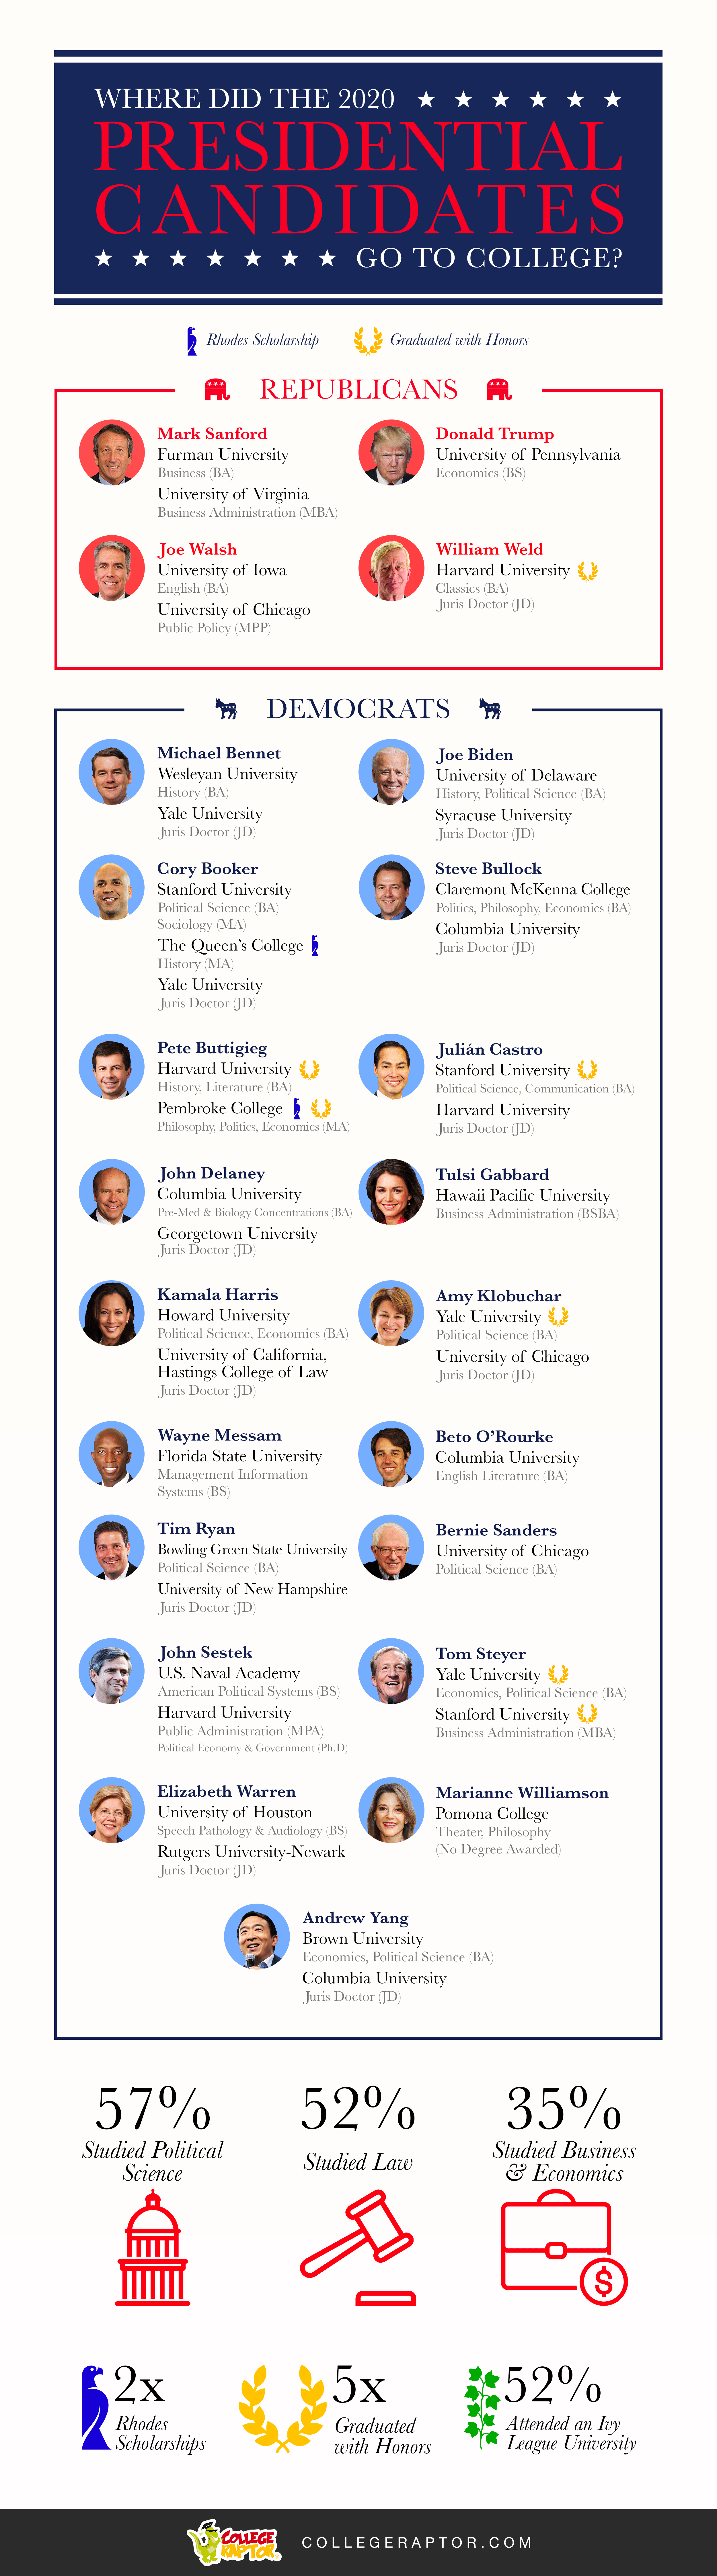 An infographic detailing where the 2020 presidential candidates went to college